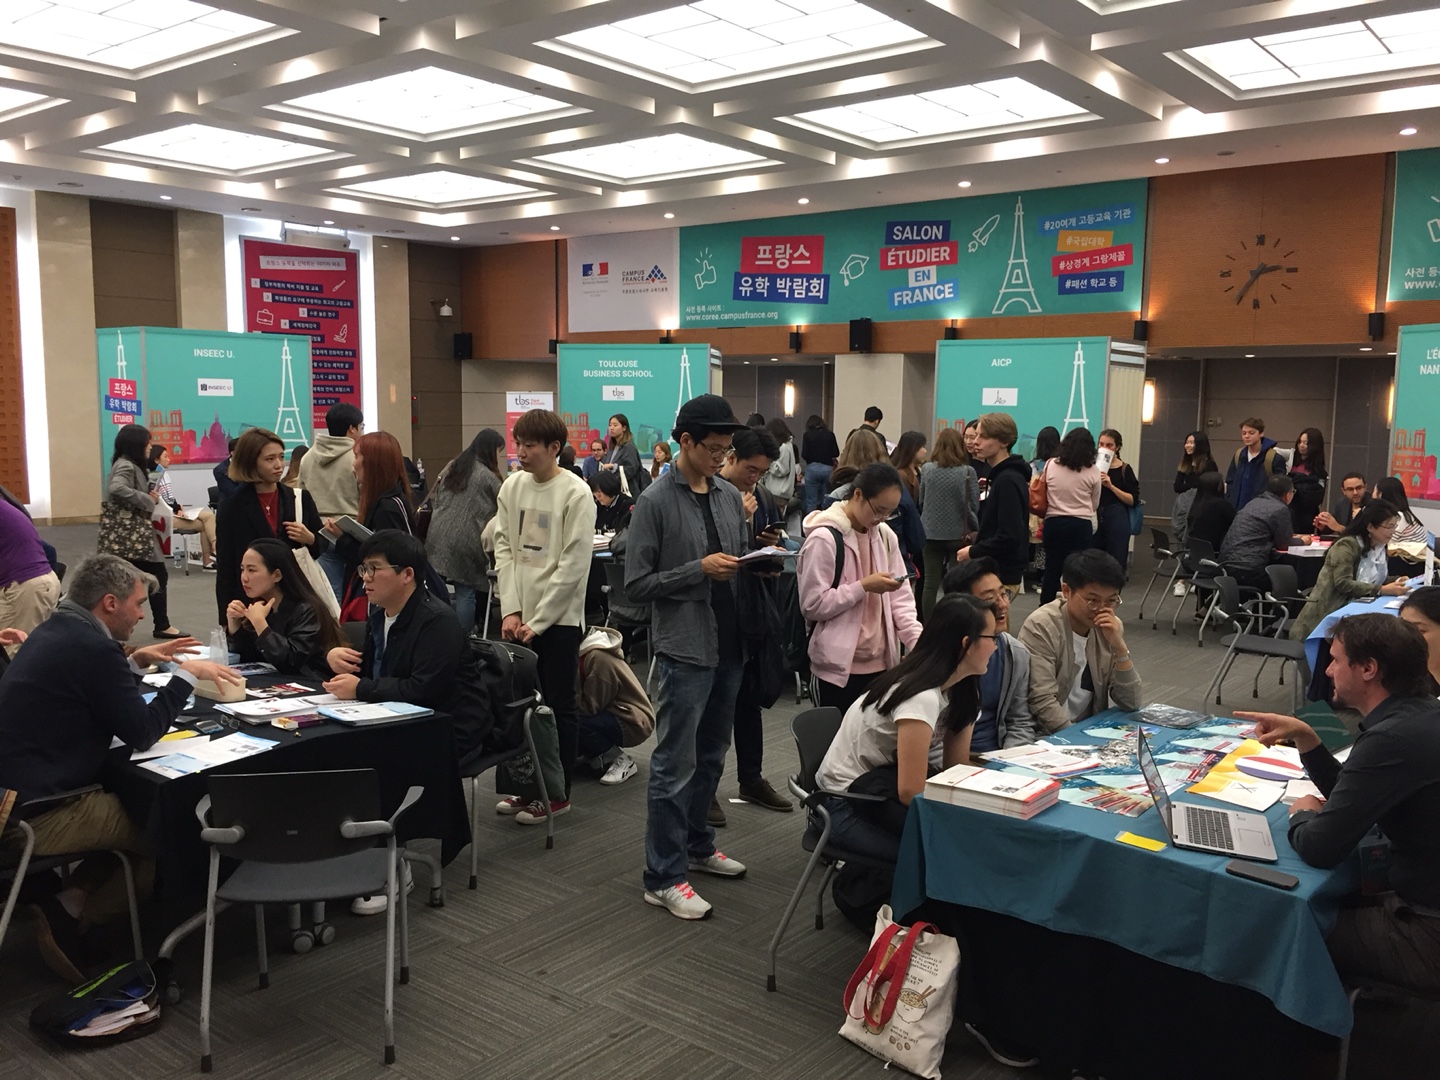 Education Fair "Study in France" in Seoul, October 2018